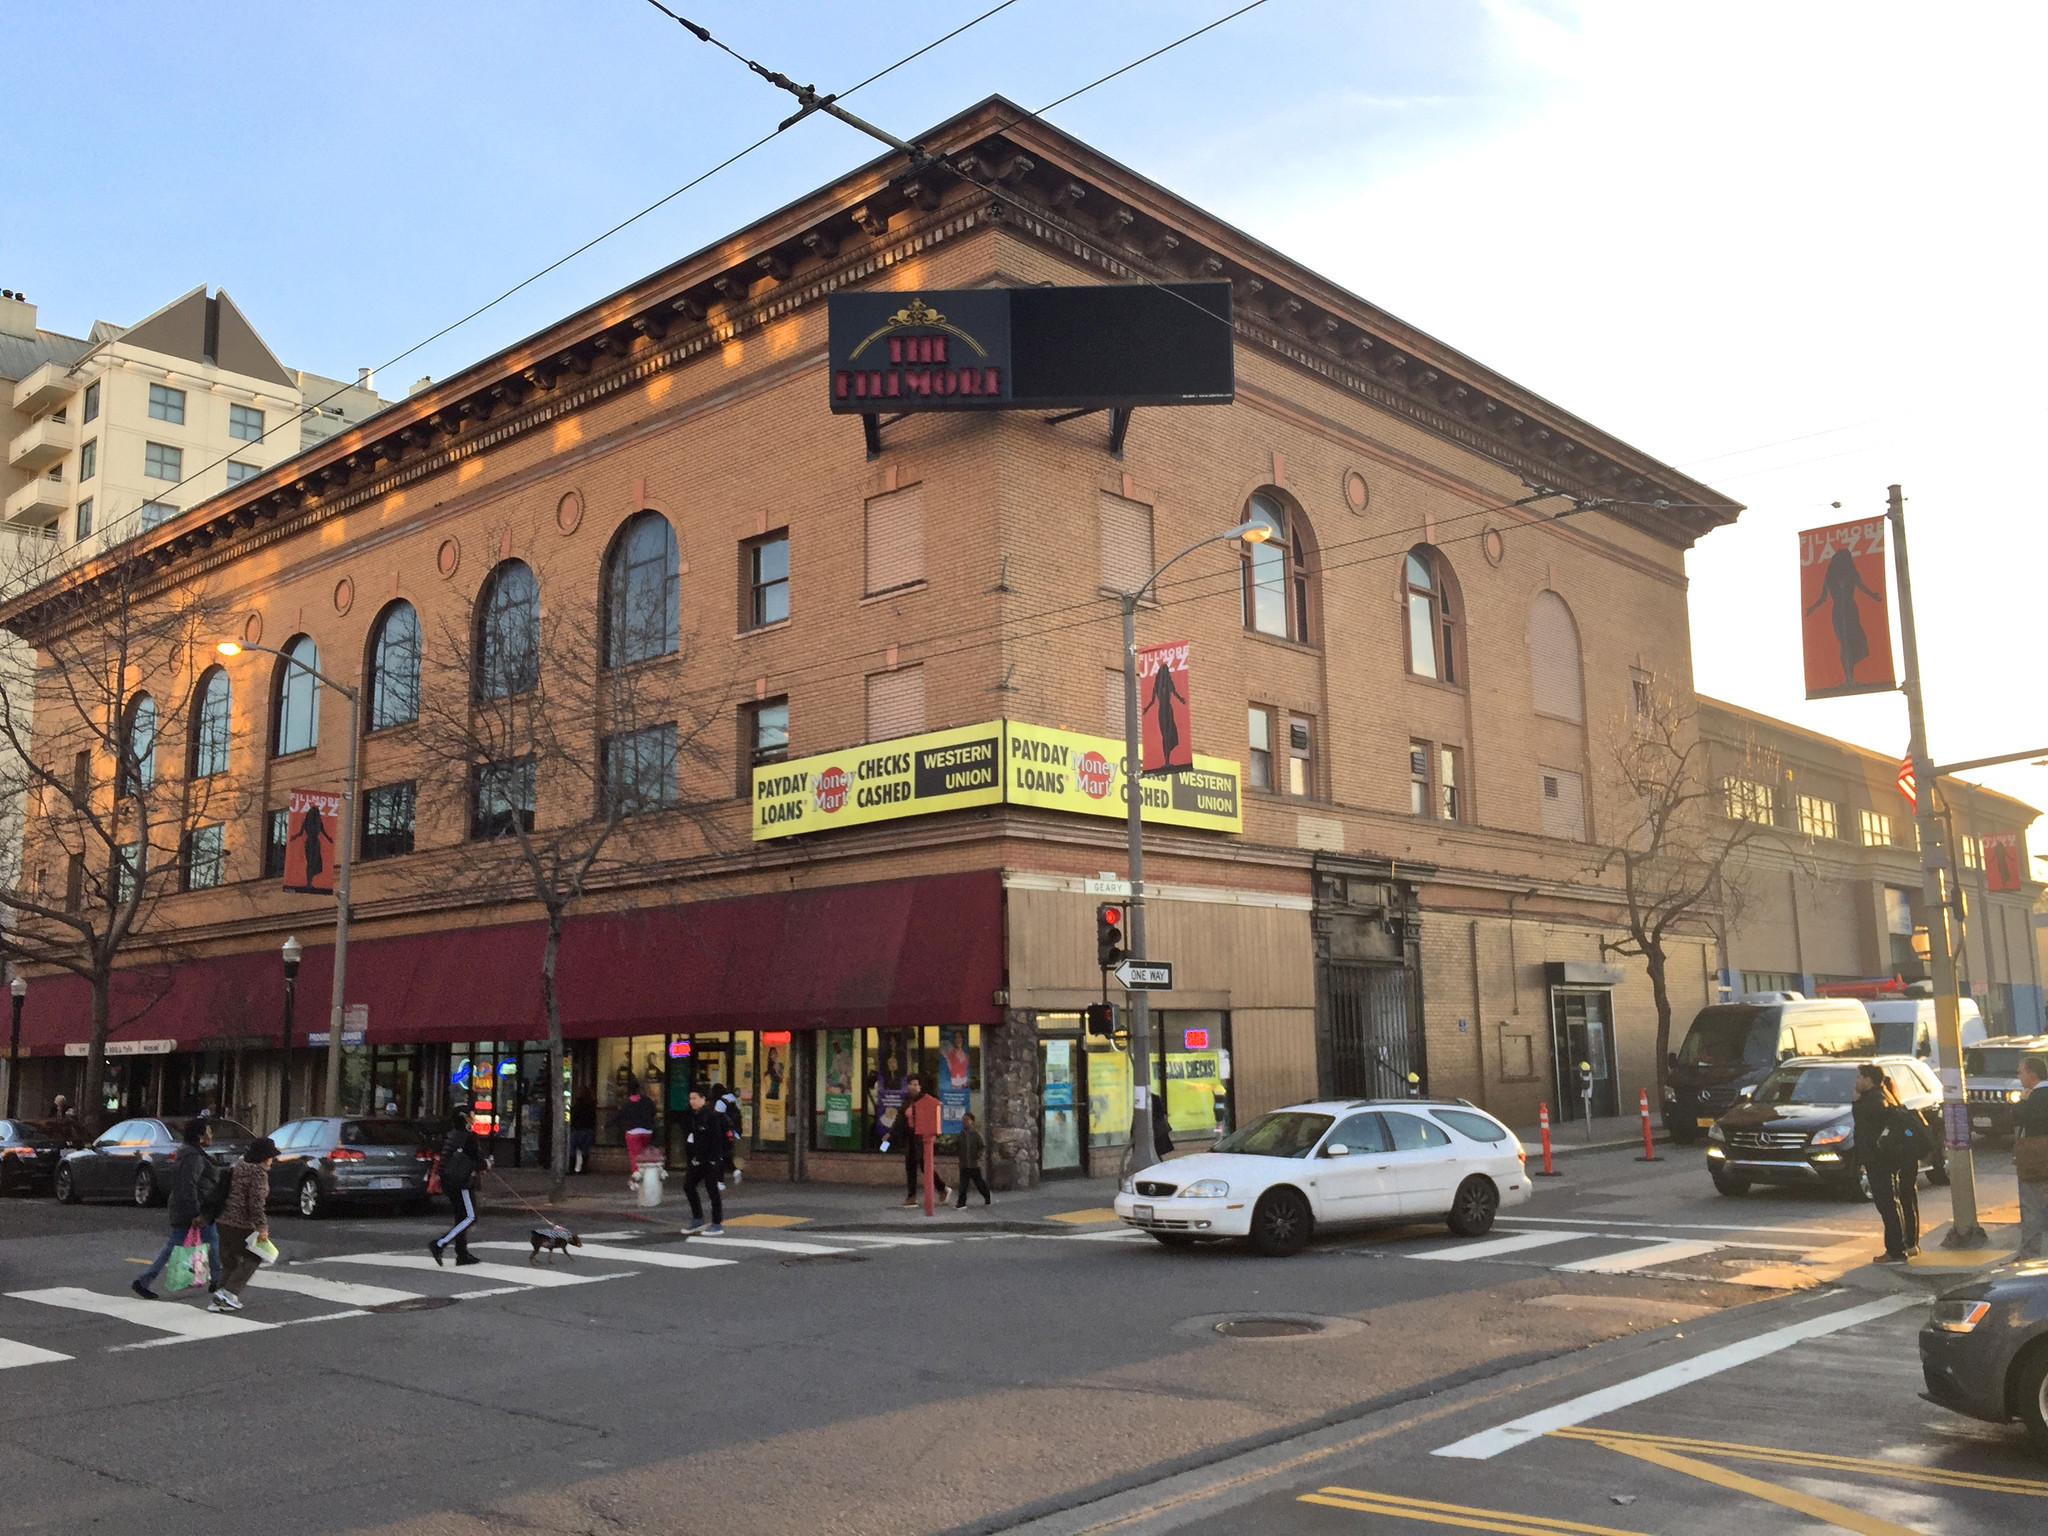 The Fillmore stands on Geary Boulevard just past Fillmore Street.